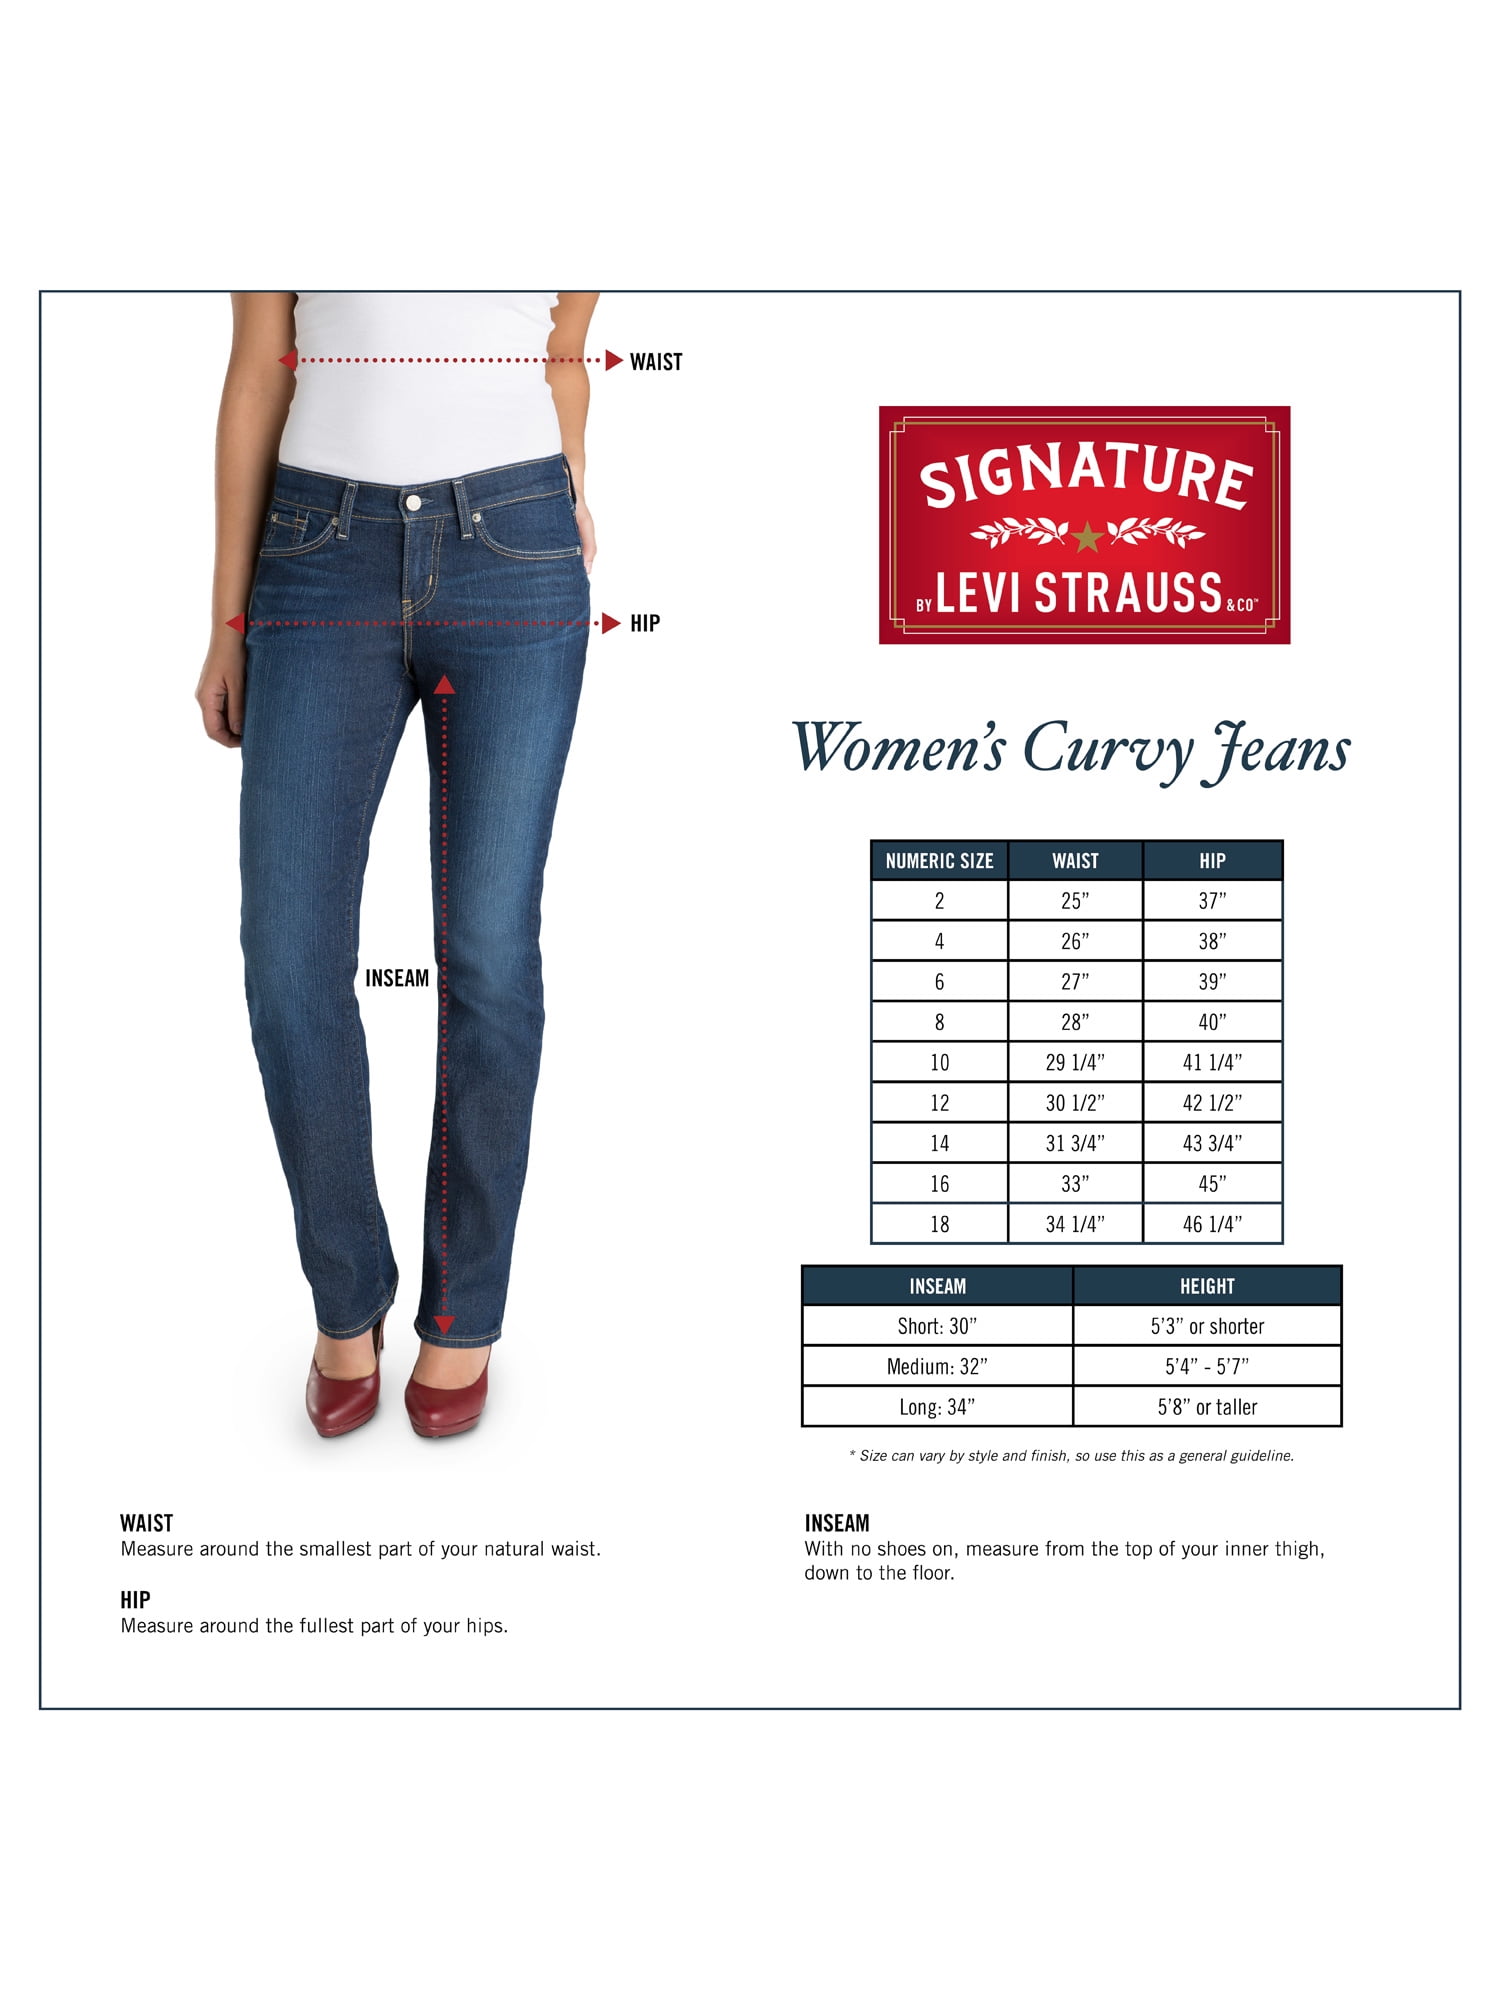 levi's 529 curvy bootcut jeans winding road wash